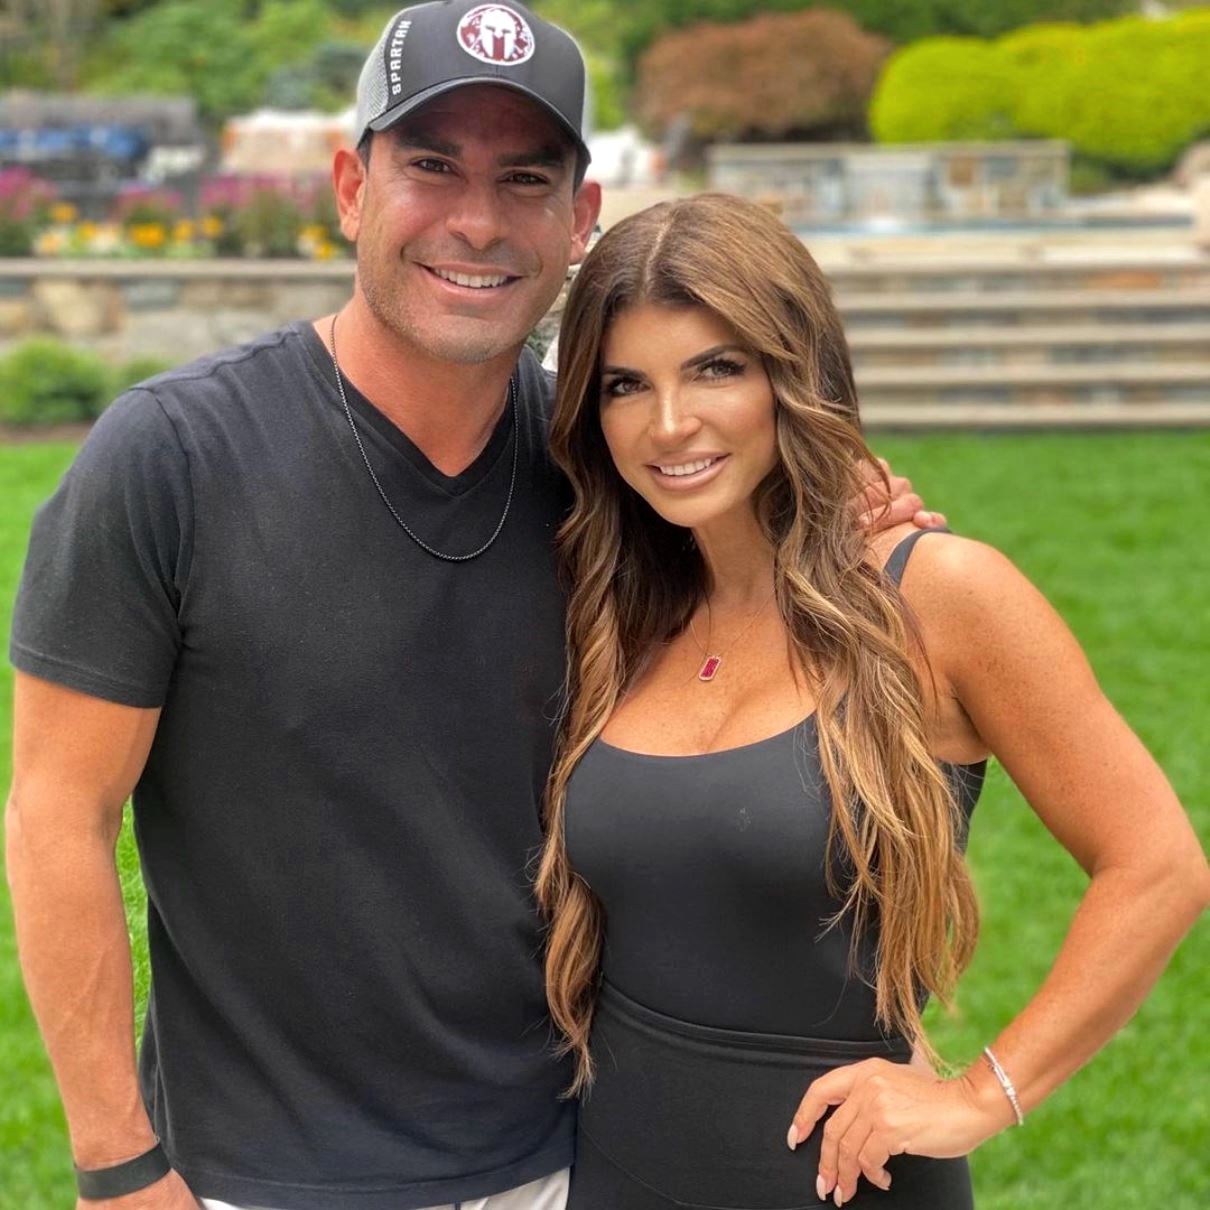 PHOTOS: RHONJ's Teresa Giudice is Engaged to Luis Ruelas! See His Beachside Proposal in Greece and Her Engagement Ring